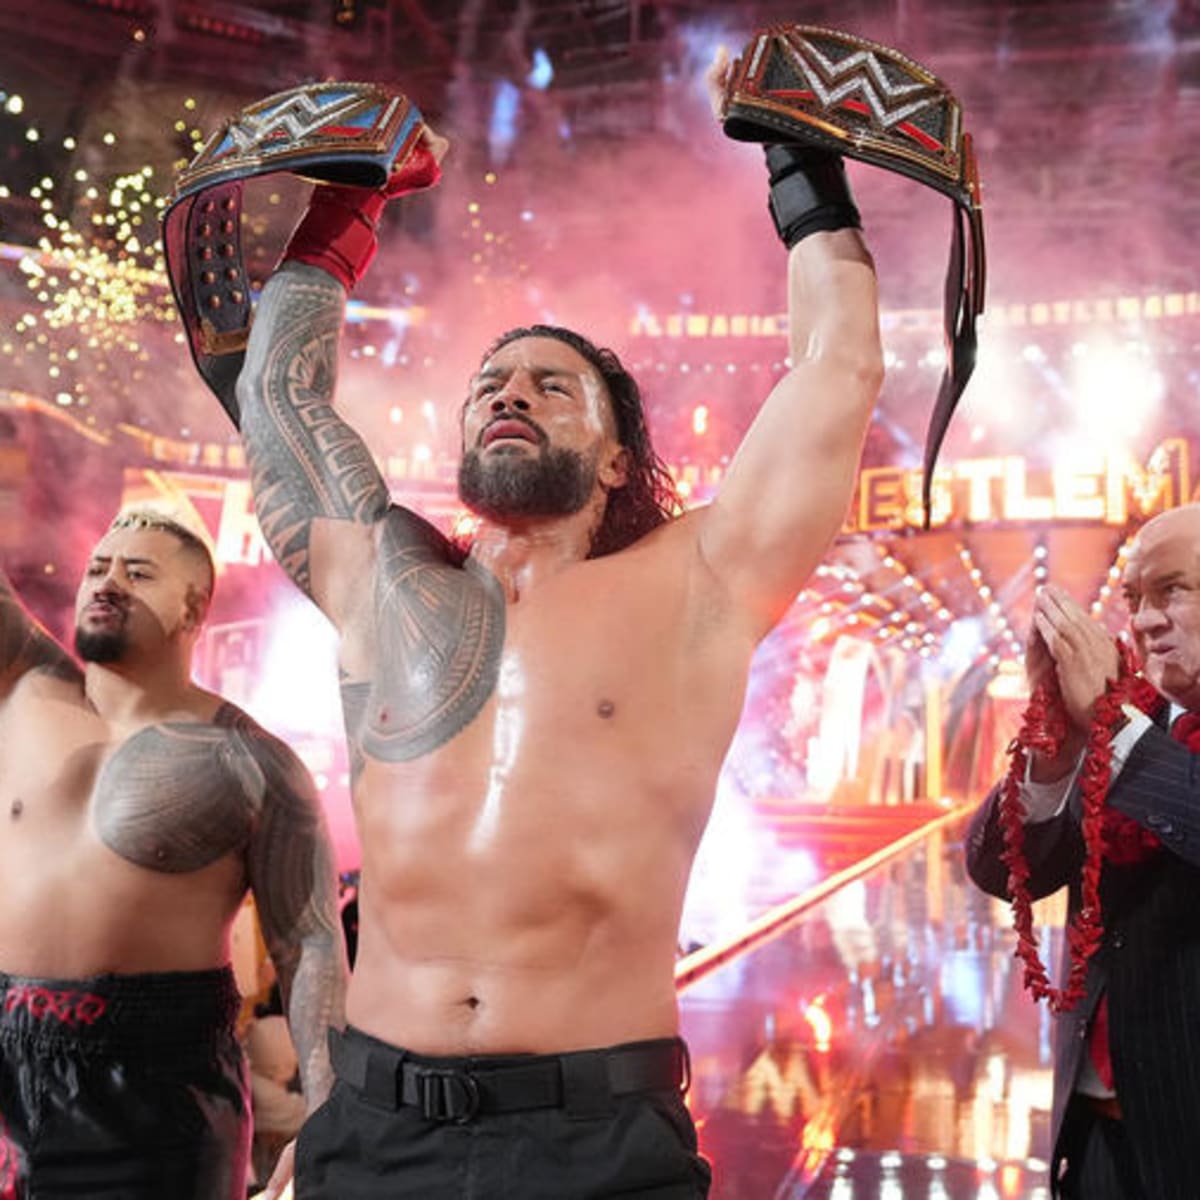 Roman Reigns vs the Rock WrestleMania 40: What if a third WWE star